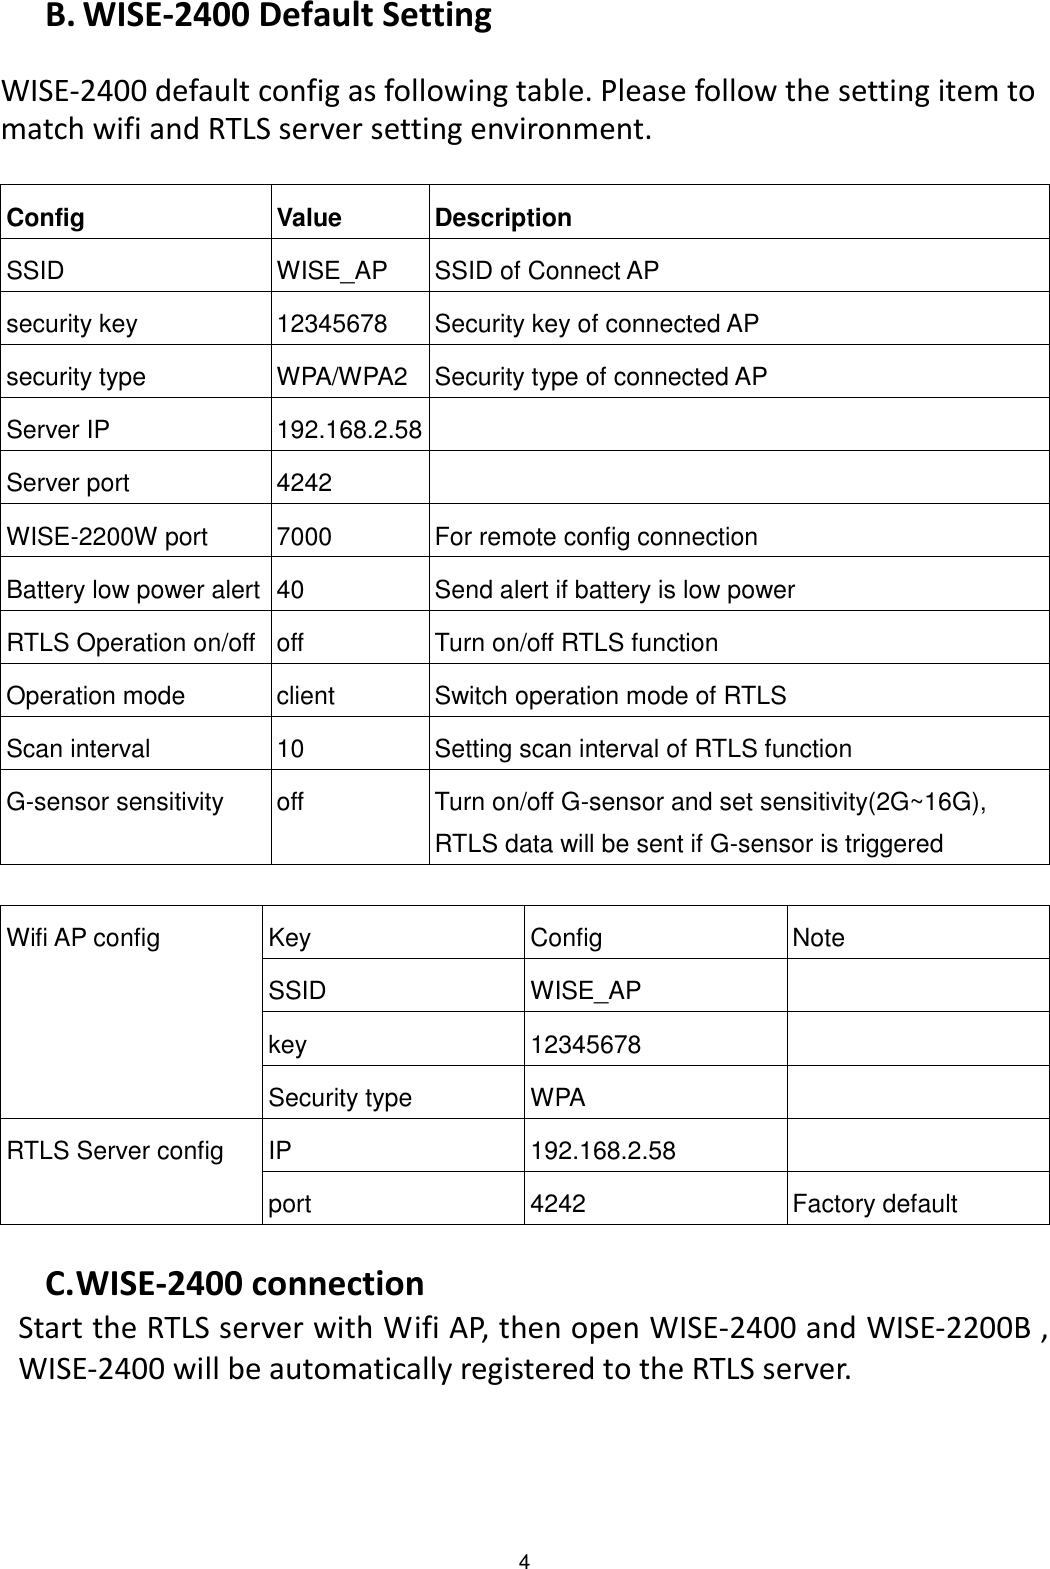 4 B. WISE-2400 Default Setting  WISE-2400 default config as following table. Please follow the setting item to match wifi and RTLS server setting environment.  Config Value Description SSID WISE_AP SSID of Connect AP security key 12345678 Security key of connected AP security type WPA/WPA2 Security type of connected AP Server IP 192.168.2.58  Server port 4242  WISE-2200W port 7000 For remote config connection Battery low power alert 40 Send alert if battery is low power RTLS Operation on/off off Turn on/off RTLS function Operation mode client Switch operation mode of RTLS Scan interval 10 Setting scan interval of RTLS function G-sensor sensitivity off Turn on/off G-sensor and set sensitivity(2G~16G), RTLS data will be sent if G-sensor is triggered  Wifi AP config Key Config Note SSID WISE_AP  key 12345678  Security type WPA  RTLS Server config IP 192.168.2.58  port 4242 Factory default  C. WISE-2400 connection Start the RTLS server with Wifi AP, then open WISE-2400 and WISE-2200B , WISE-2400 will be automatically registered to the RTLS server.  